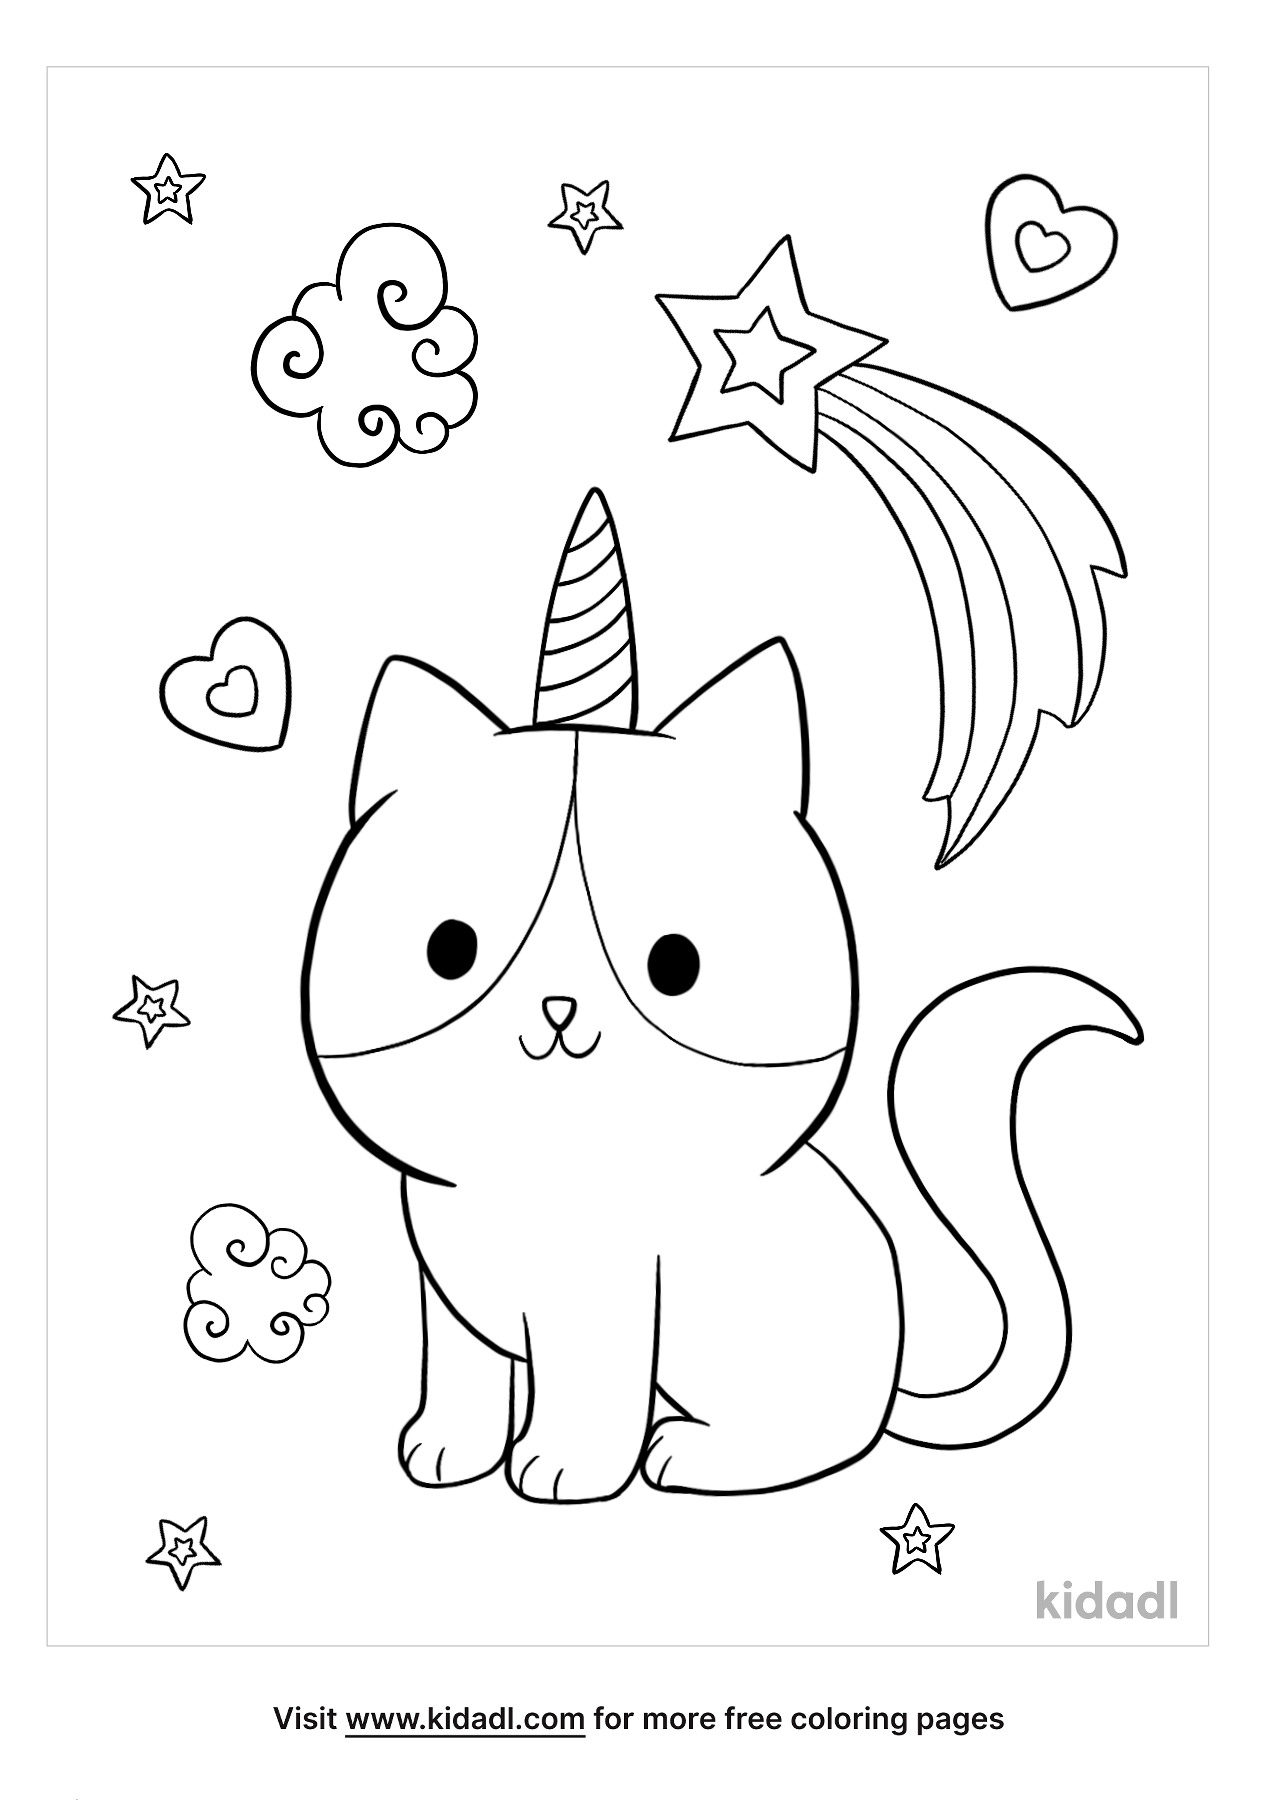 Caticorn Coloring Pages   Free Unicorns Coloring Pages   Kidadl ...